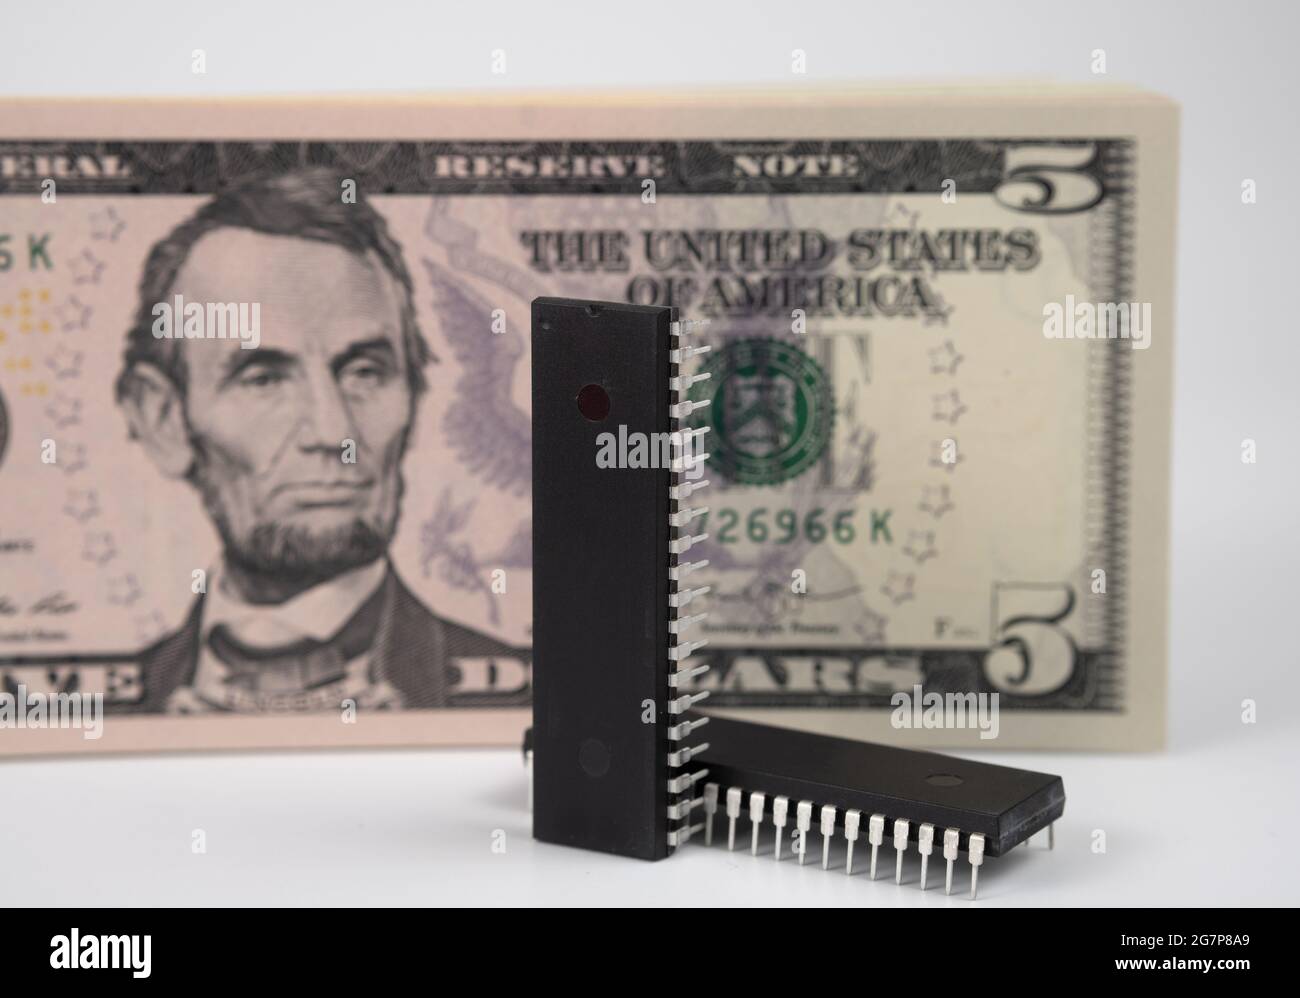 Large computer chips placed next to 5 US dollar banknotes. Concept for investment in semiconductor industry and golbal chip shortage. Stock Photo